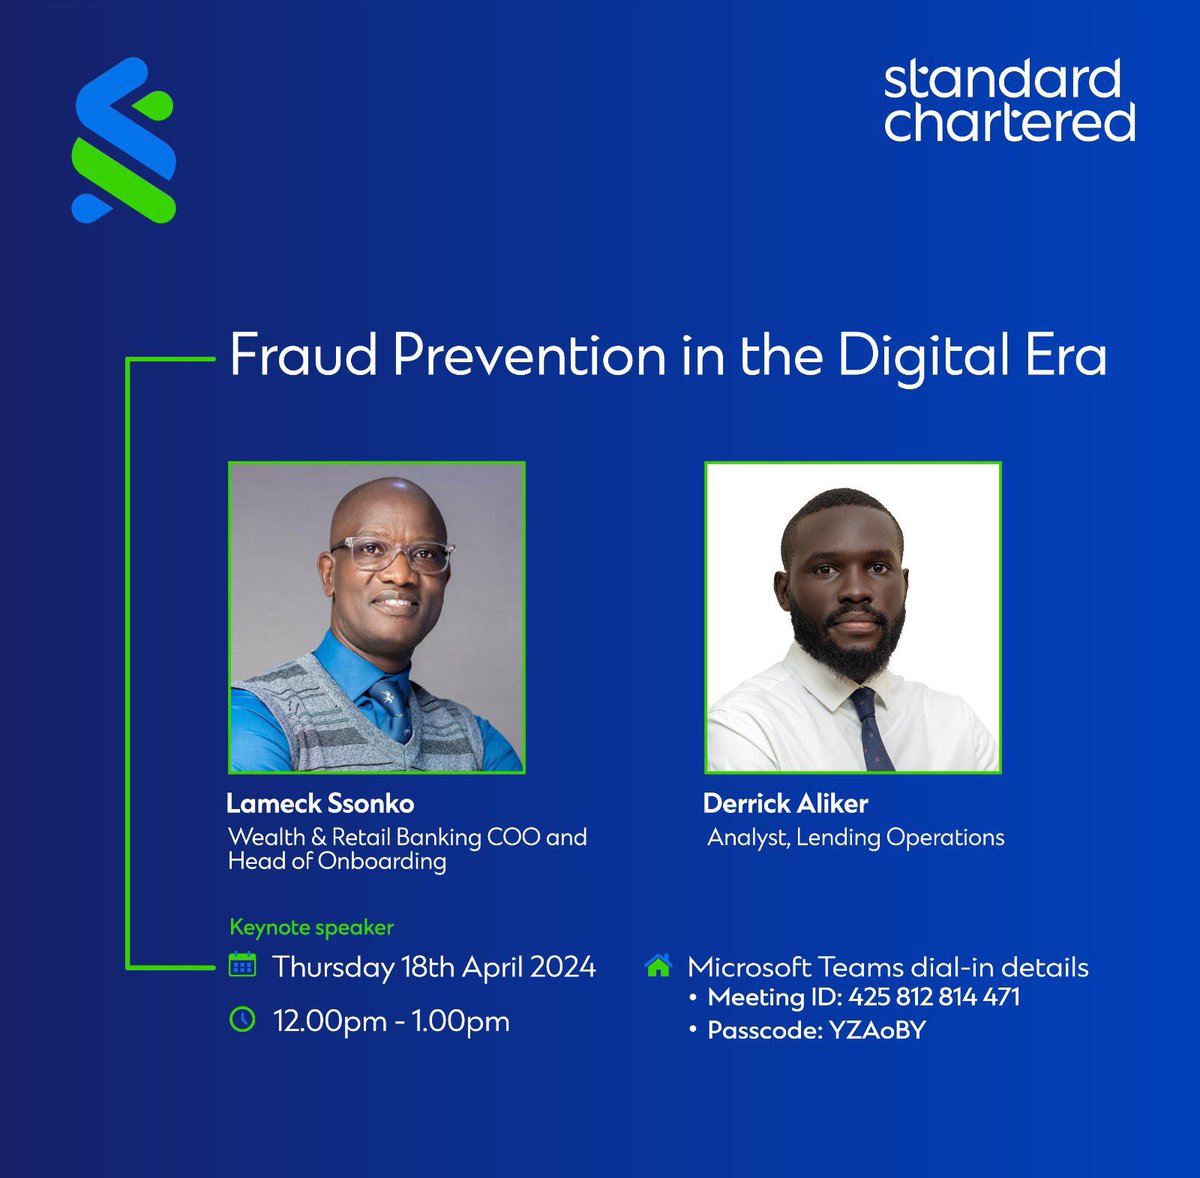 Let’s catch up on Thursday for the Fraud Prevention in the Digital Era webinar with Mr Lameck Ssonko and Mr Derrick Aliker from @StanChartUGA Time : 12-1pm #HereForGood